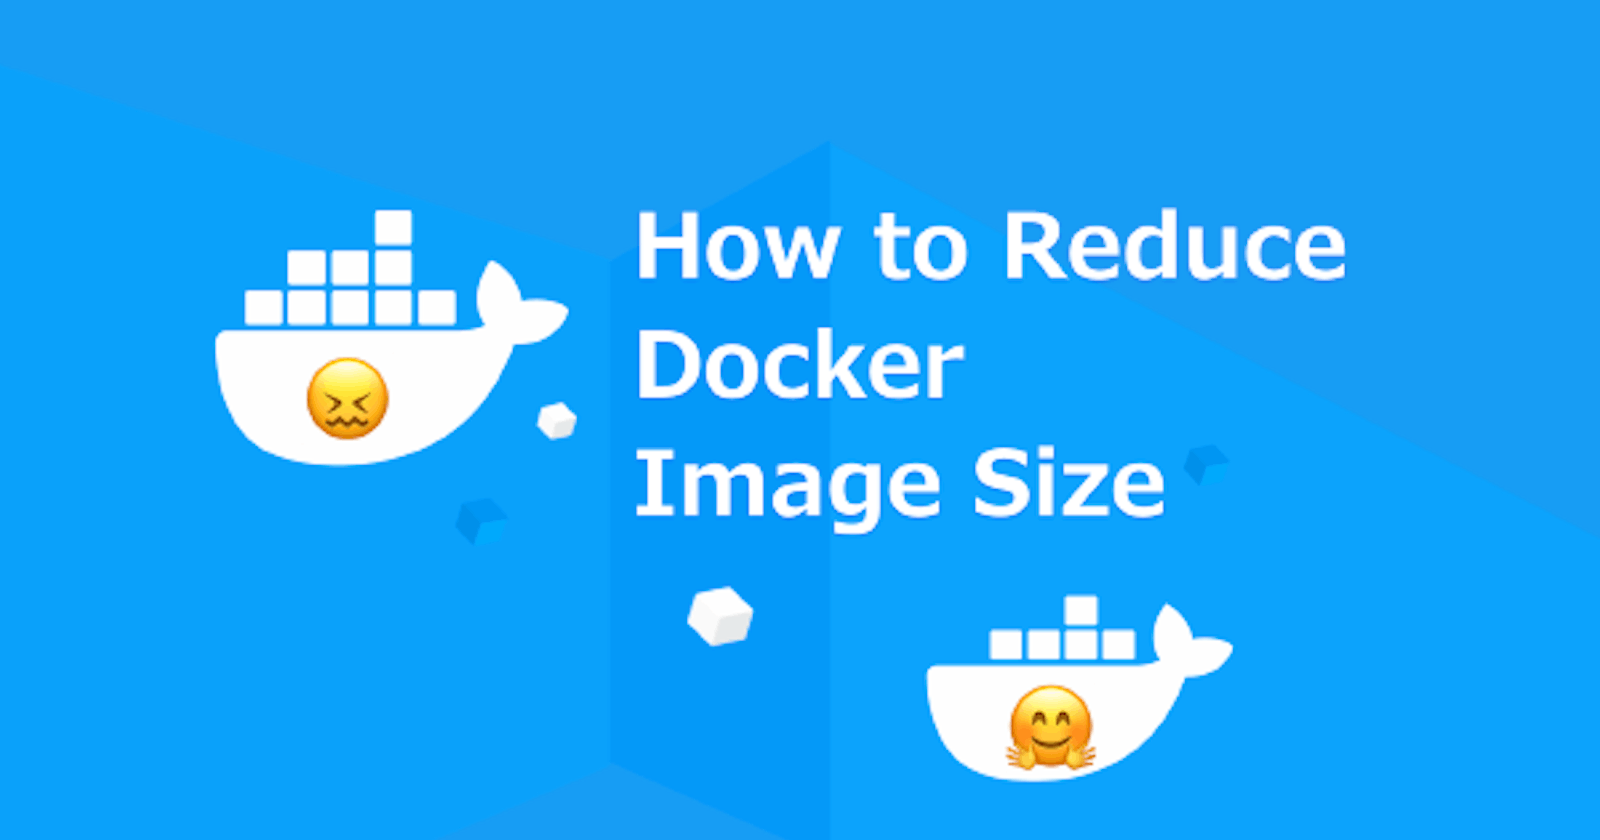 How to Reduce Docker Image Size